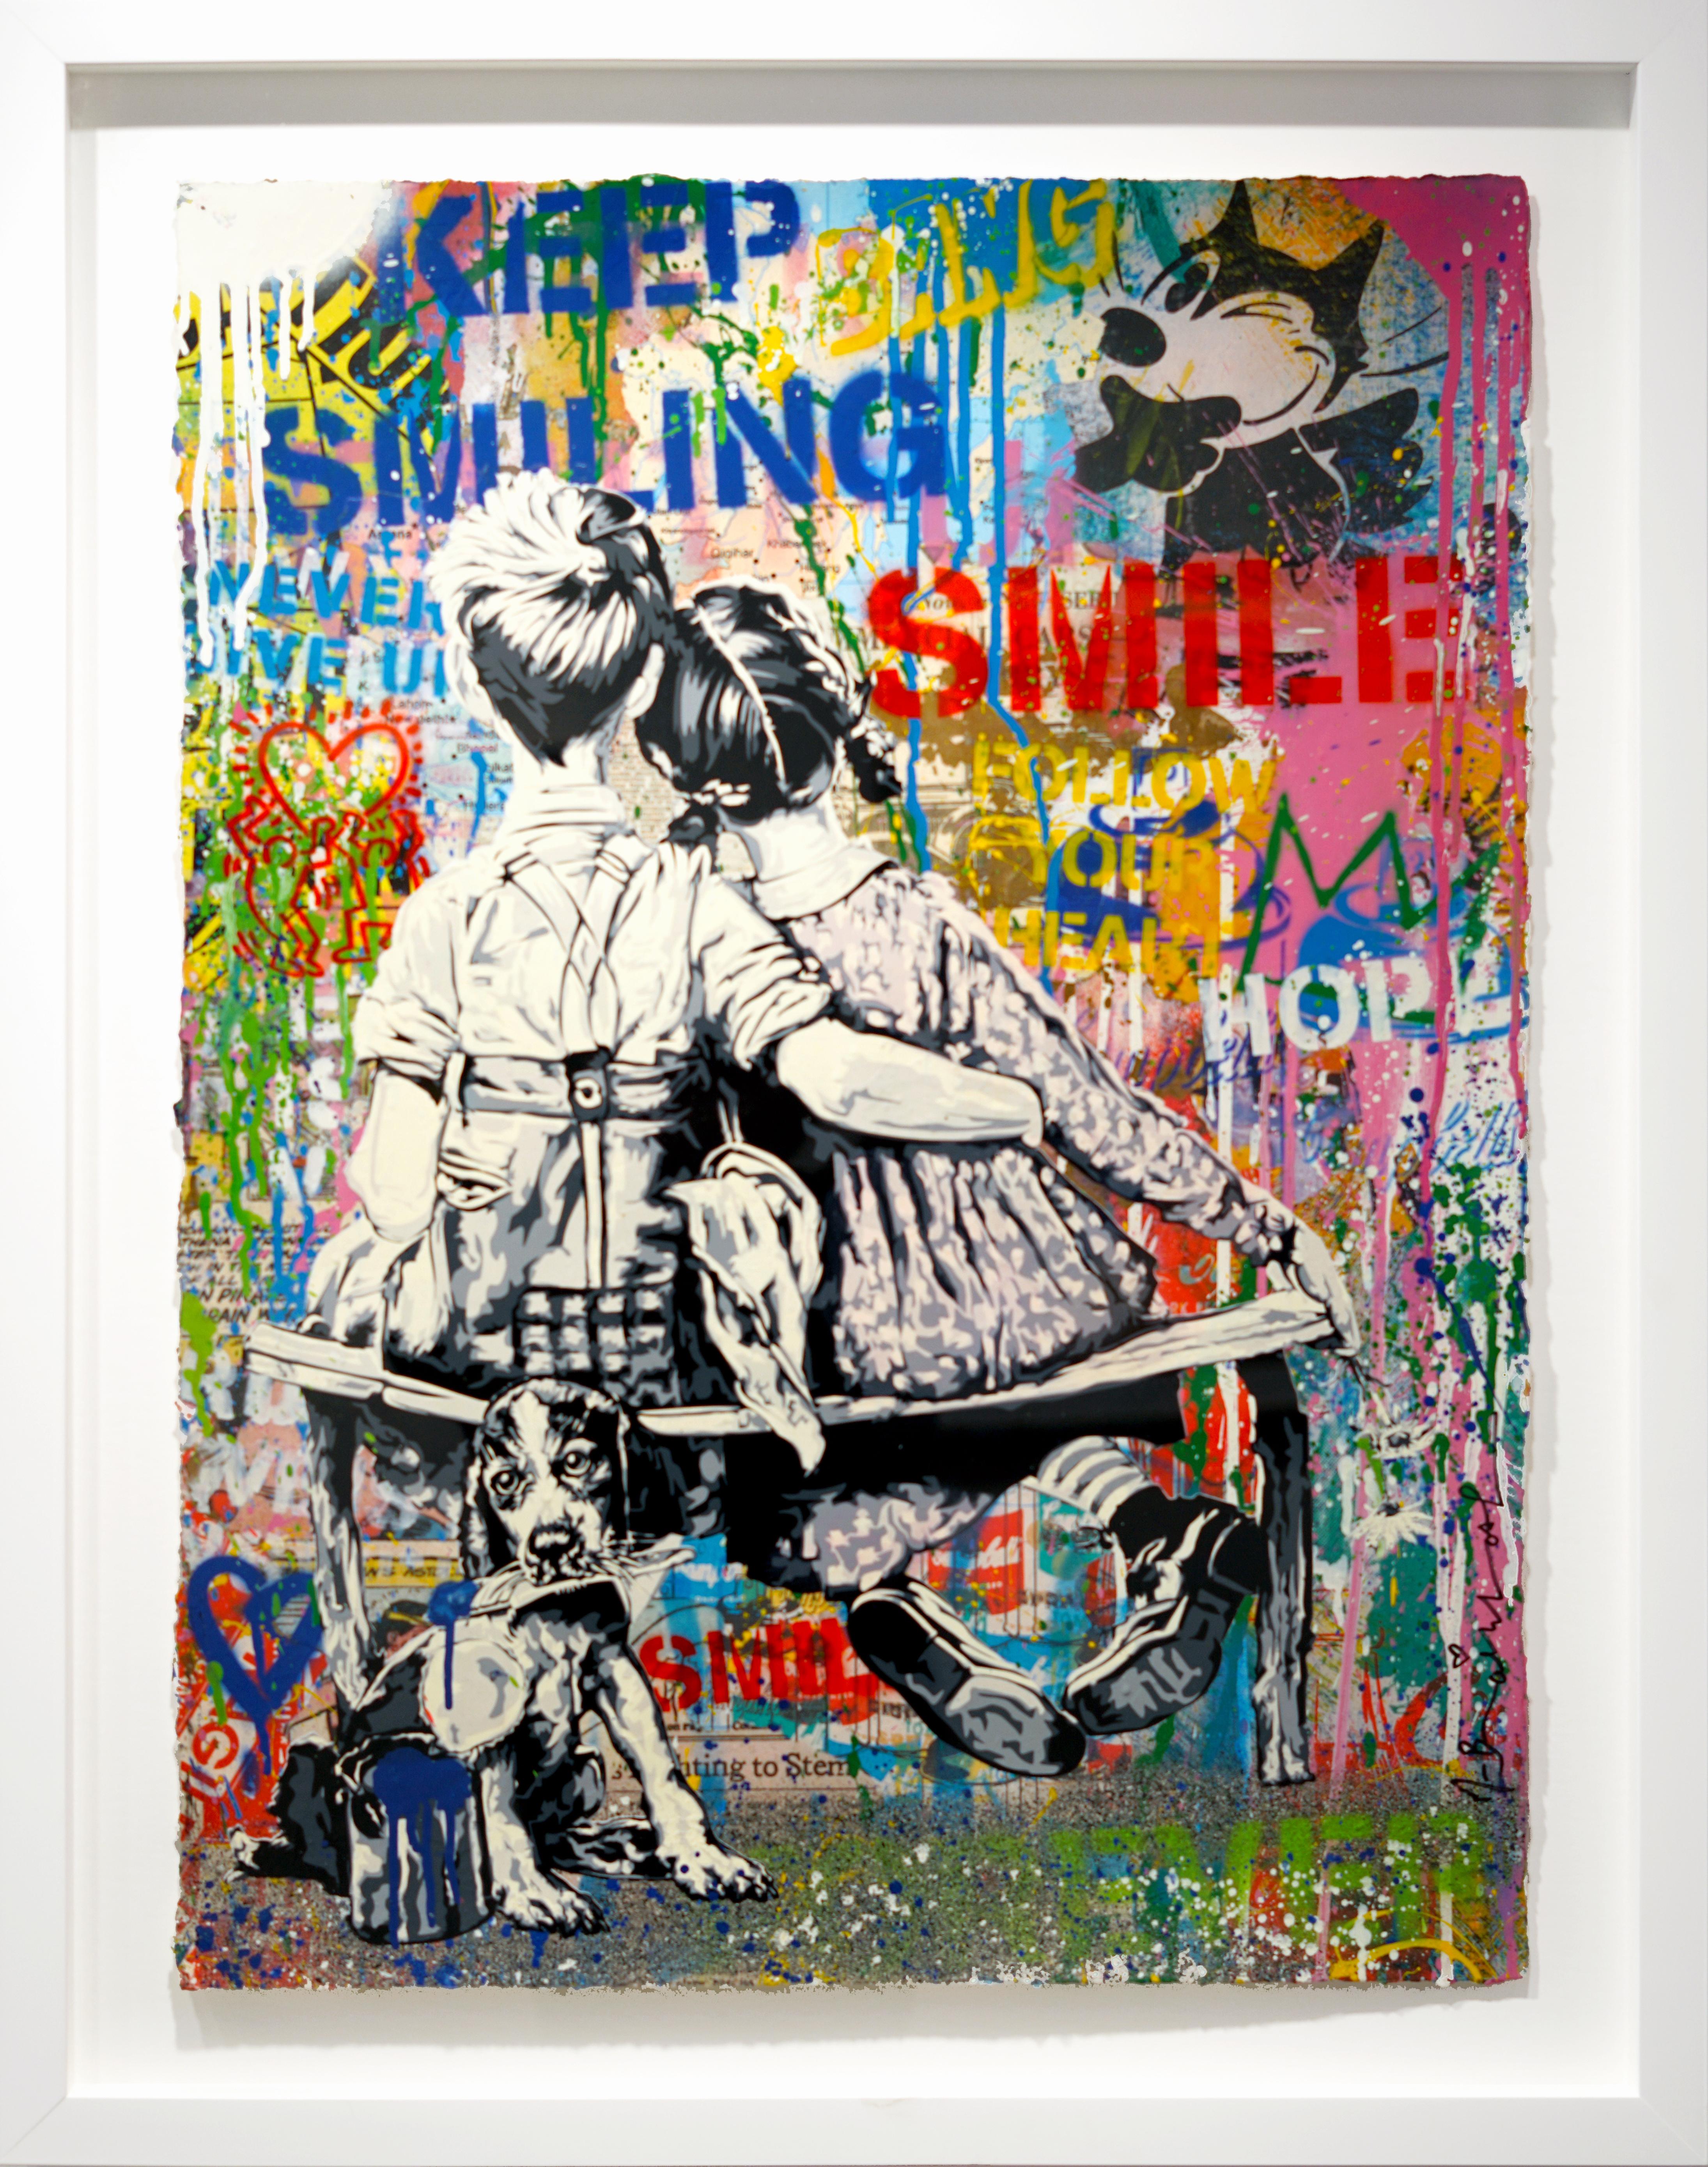 Work Well Together - Mixed Media Art by Mr. Brainwash